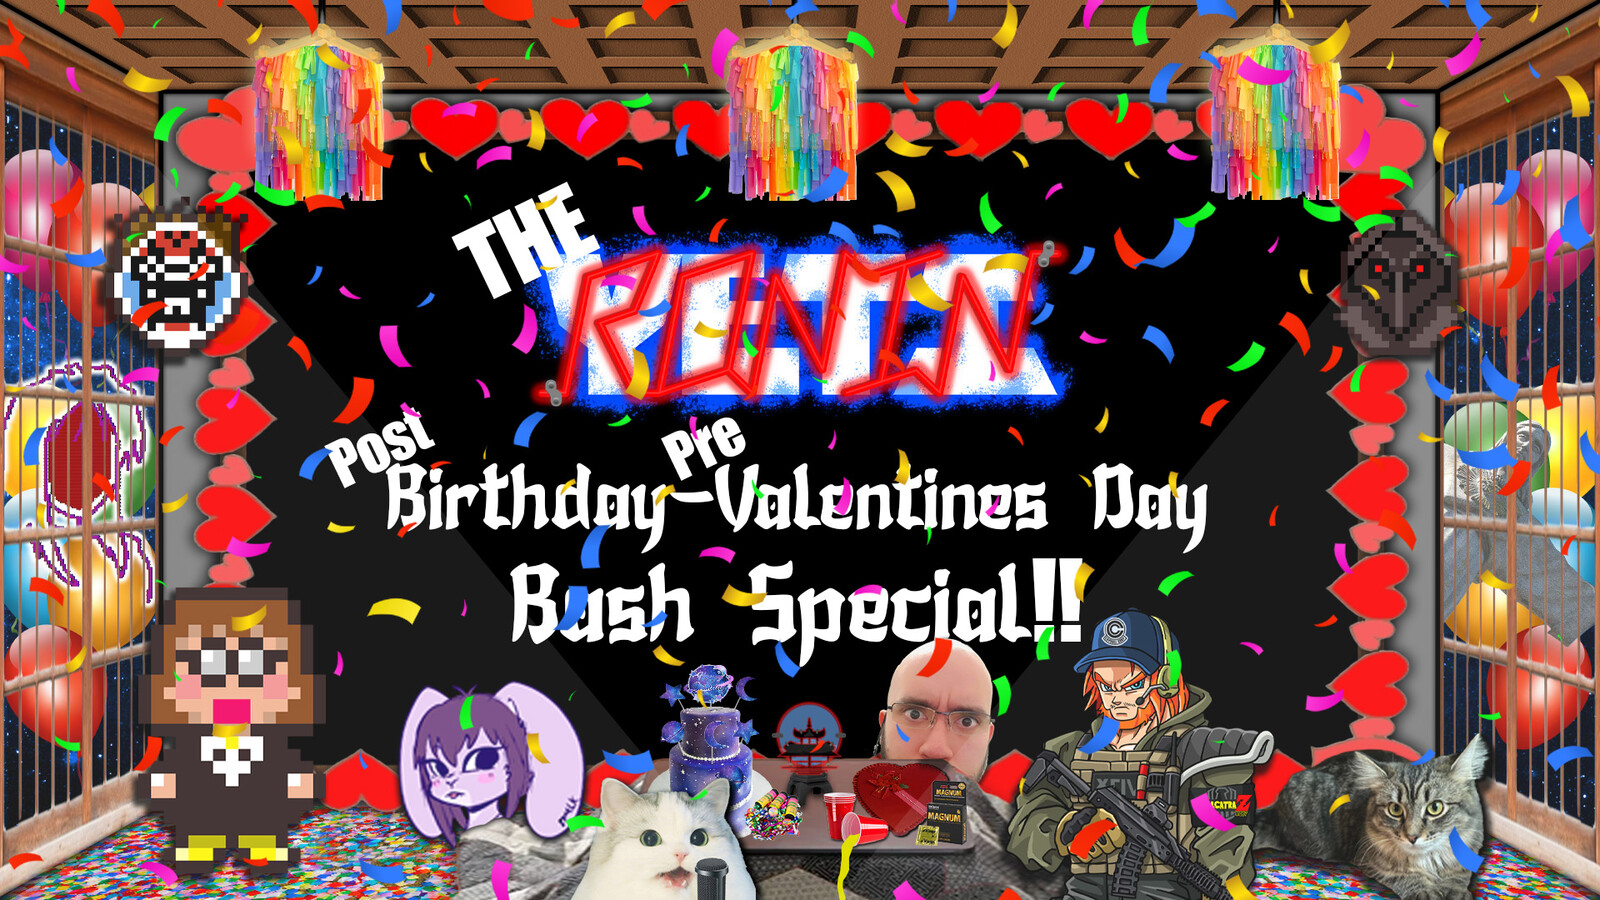 The Ronin Yeti Post- Birthday Pre-Valentines Day Bash Special!! Ad Thumbnail